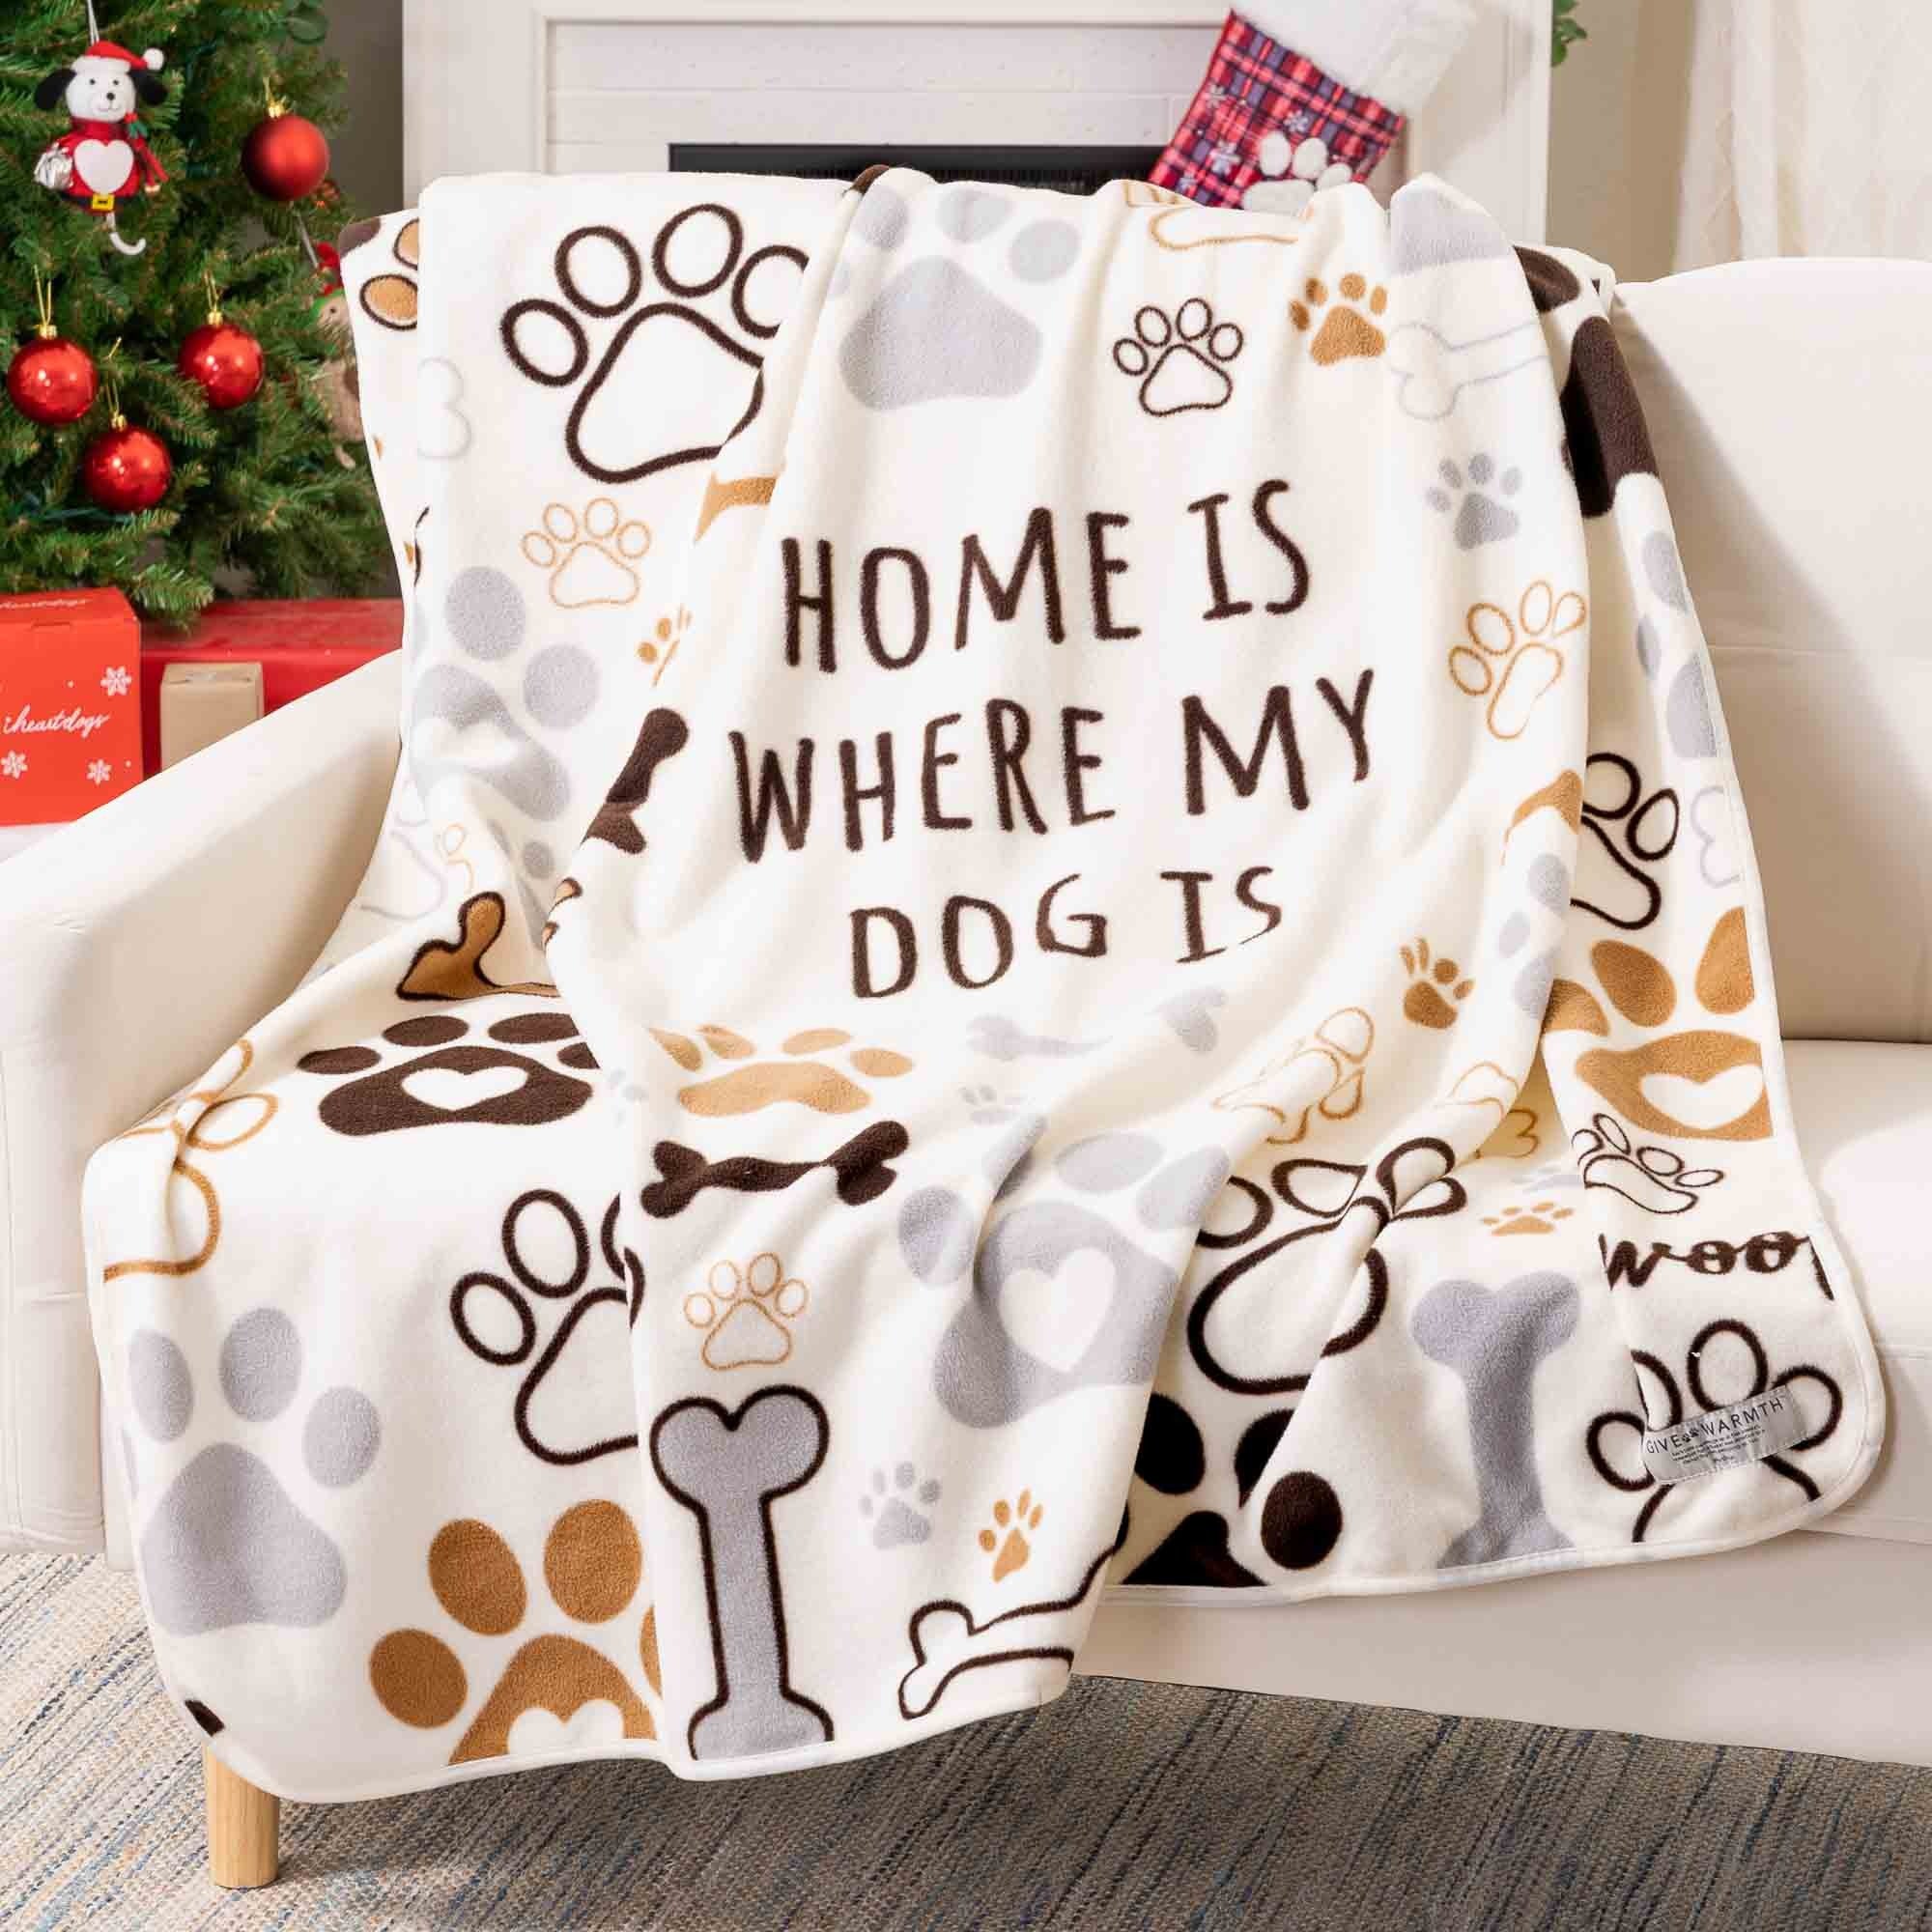 Fleece Dog Blanket Home Is Where The Dog Is Paw Print On Blanket Gift For Dog Lover Throw Sherpa Warm Blanket